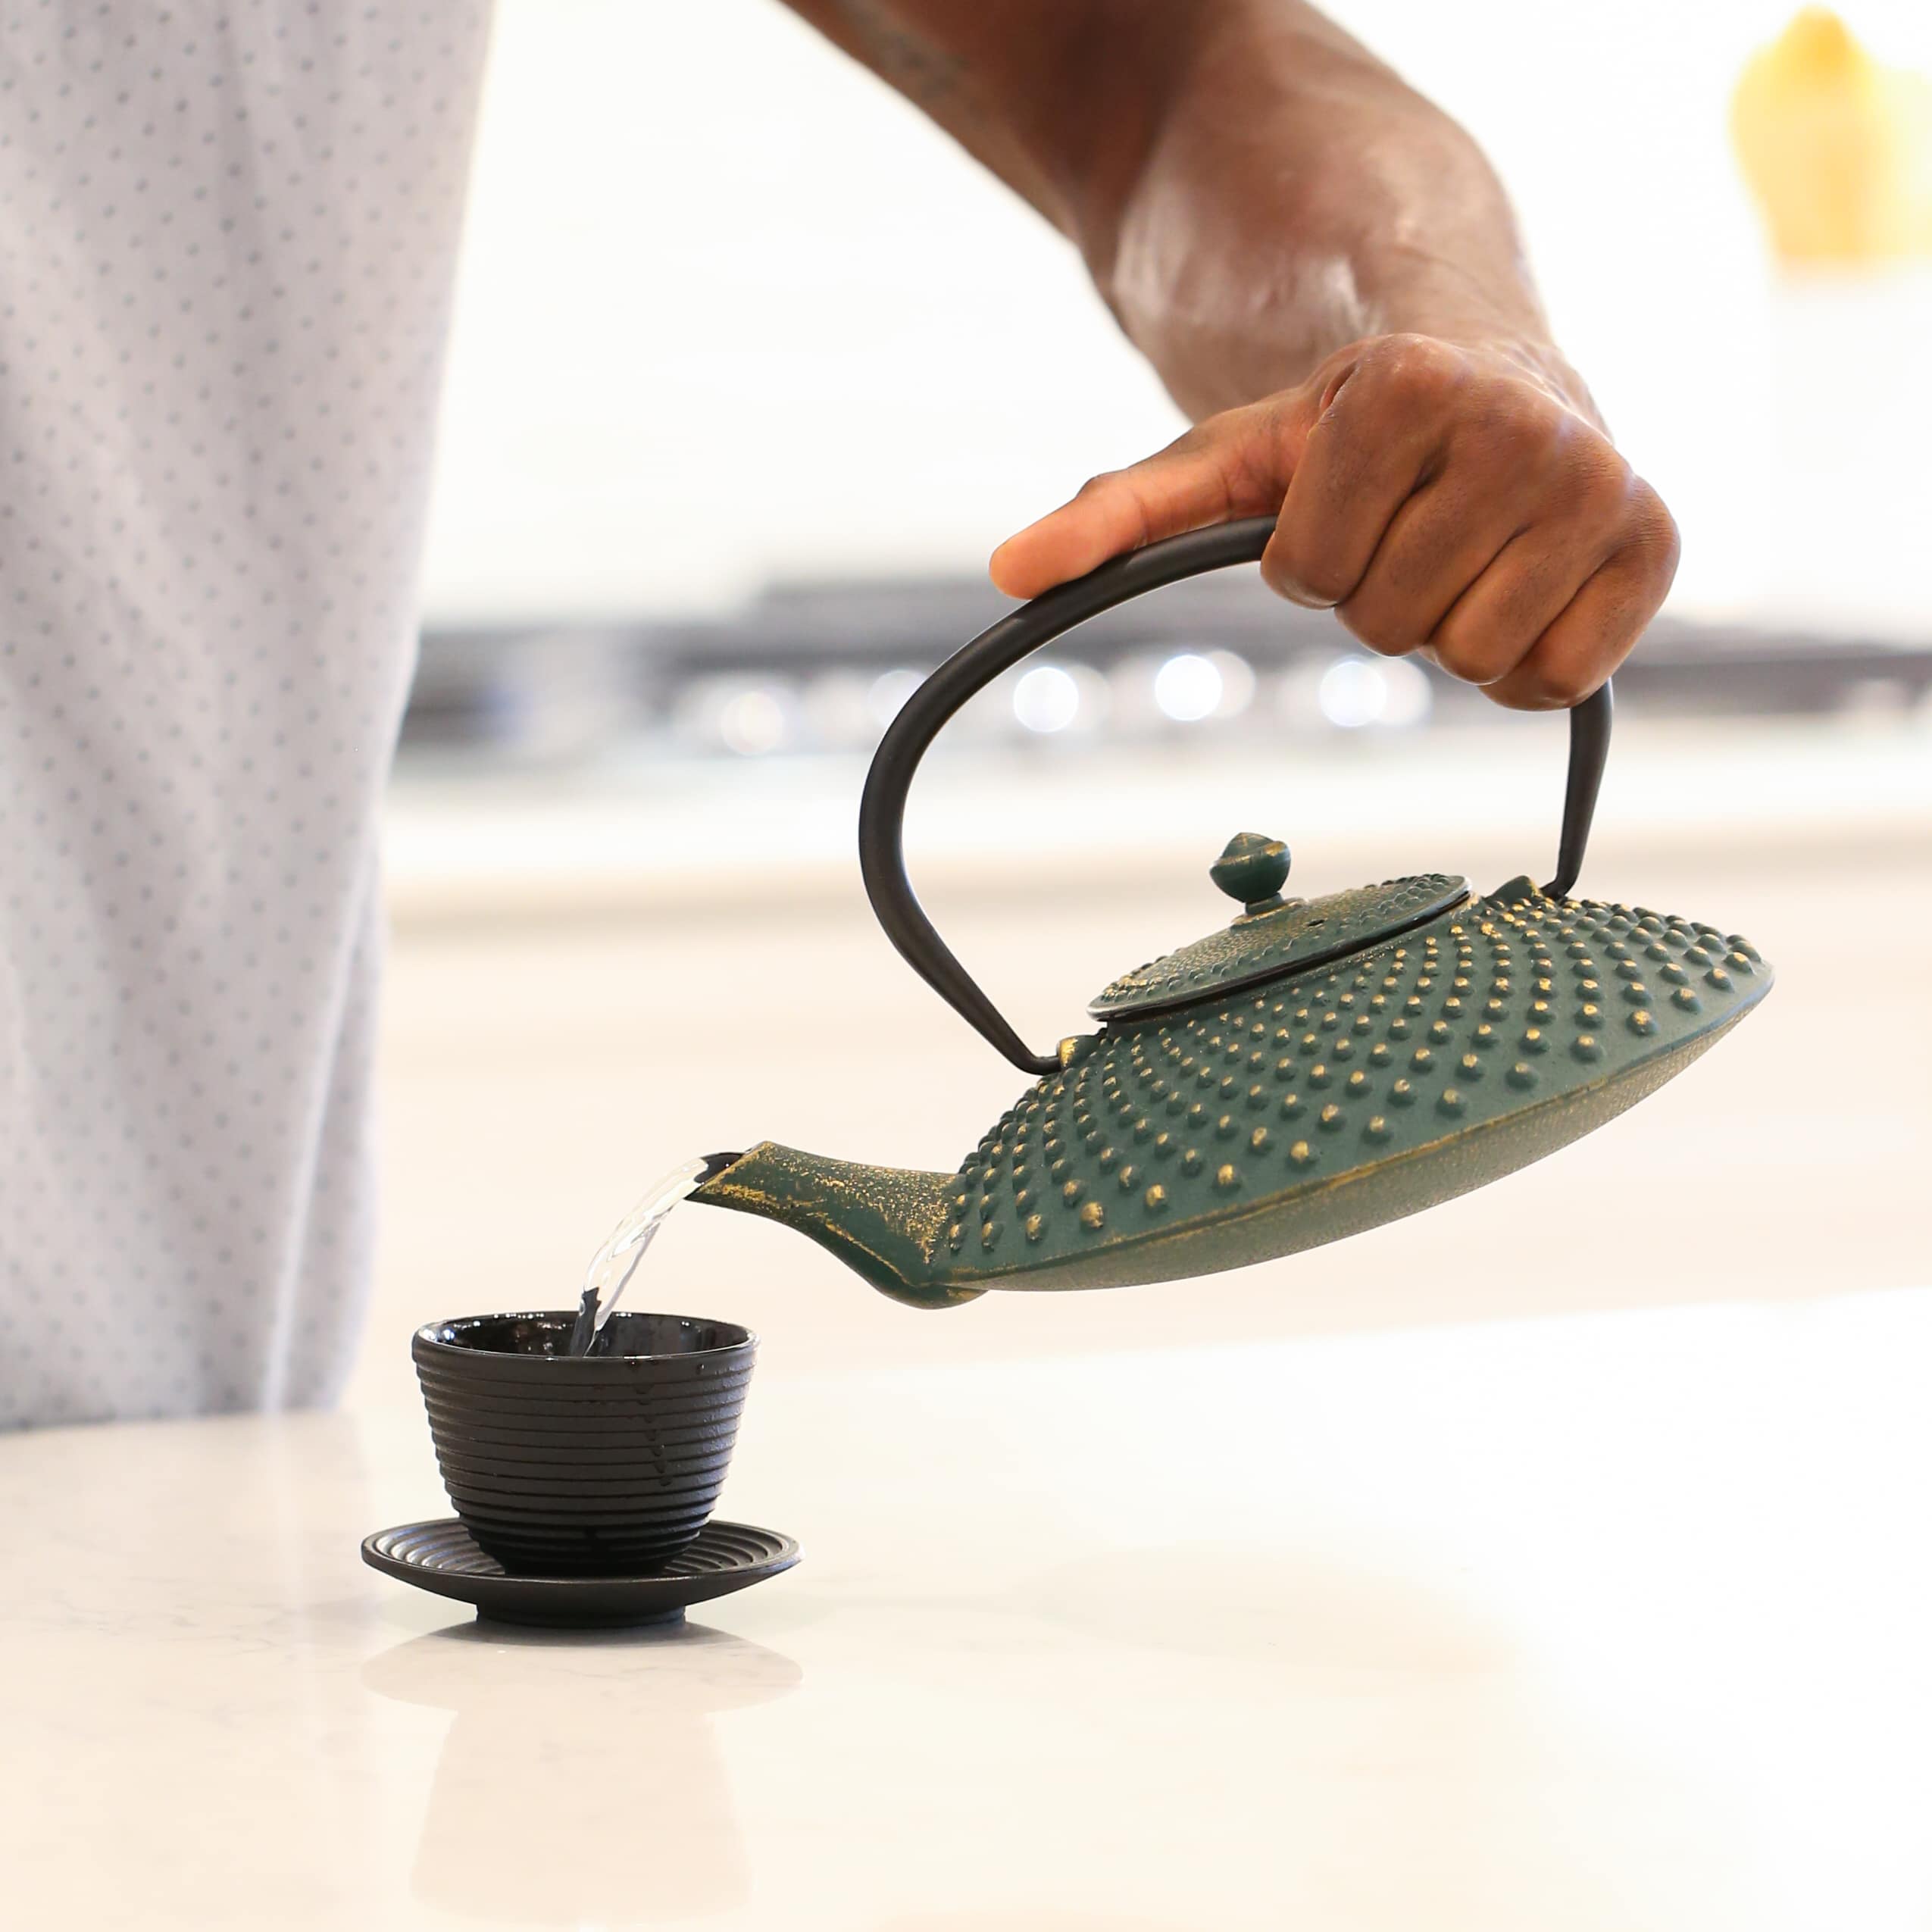 DESIGNED WITH YOU IN MIND: Designed for beauty as well as function, the elegant design ensures that everyone will find what they love, while the tea infuser provides the functionality for easily brewing a delicious cup of tea.